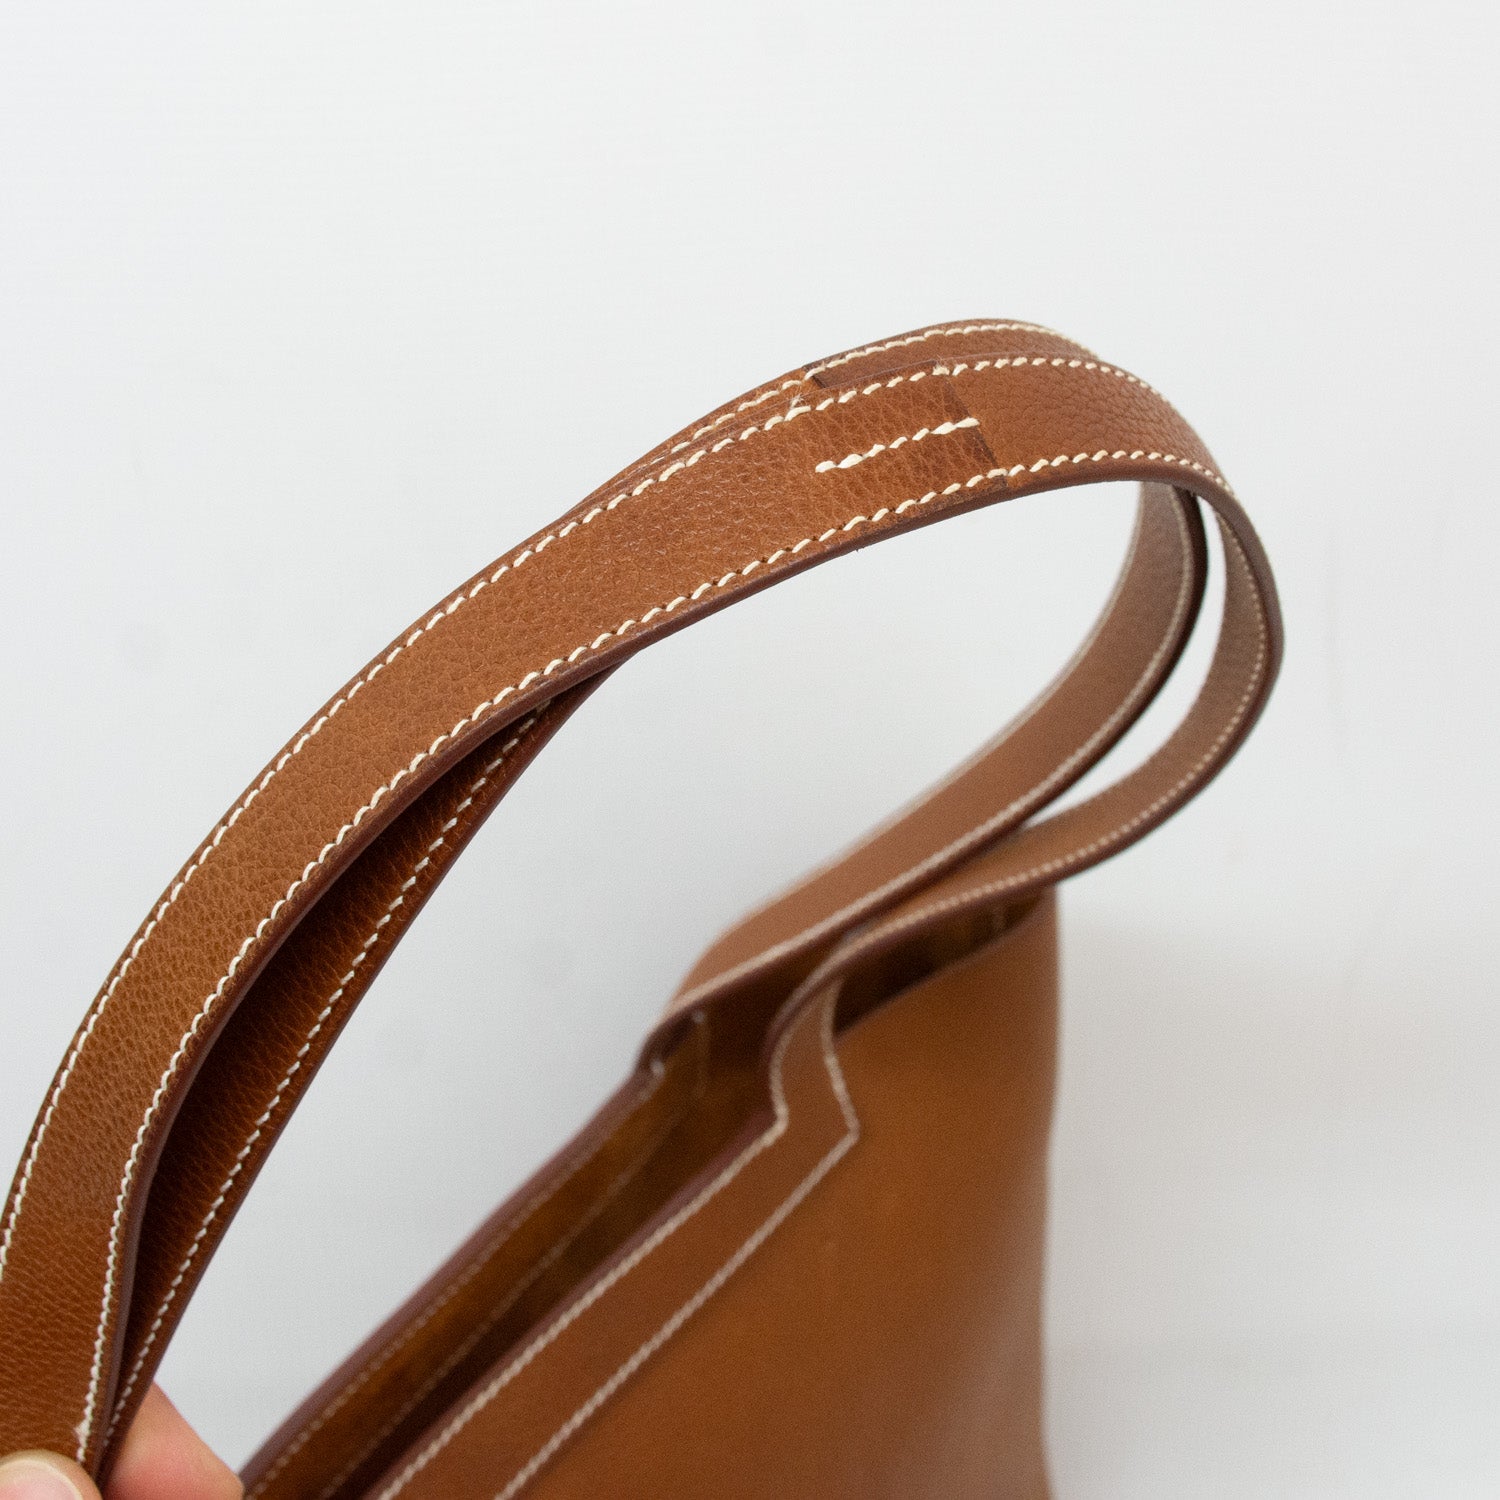 Hermès Cabasellier 31 Tote - Brown Leather